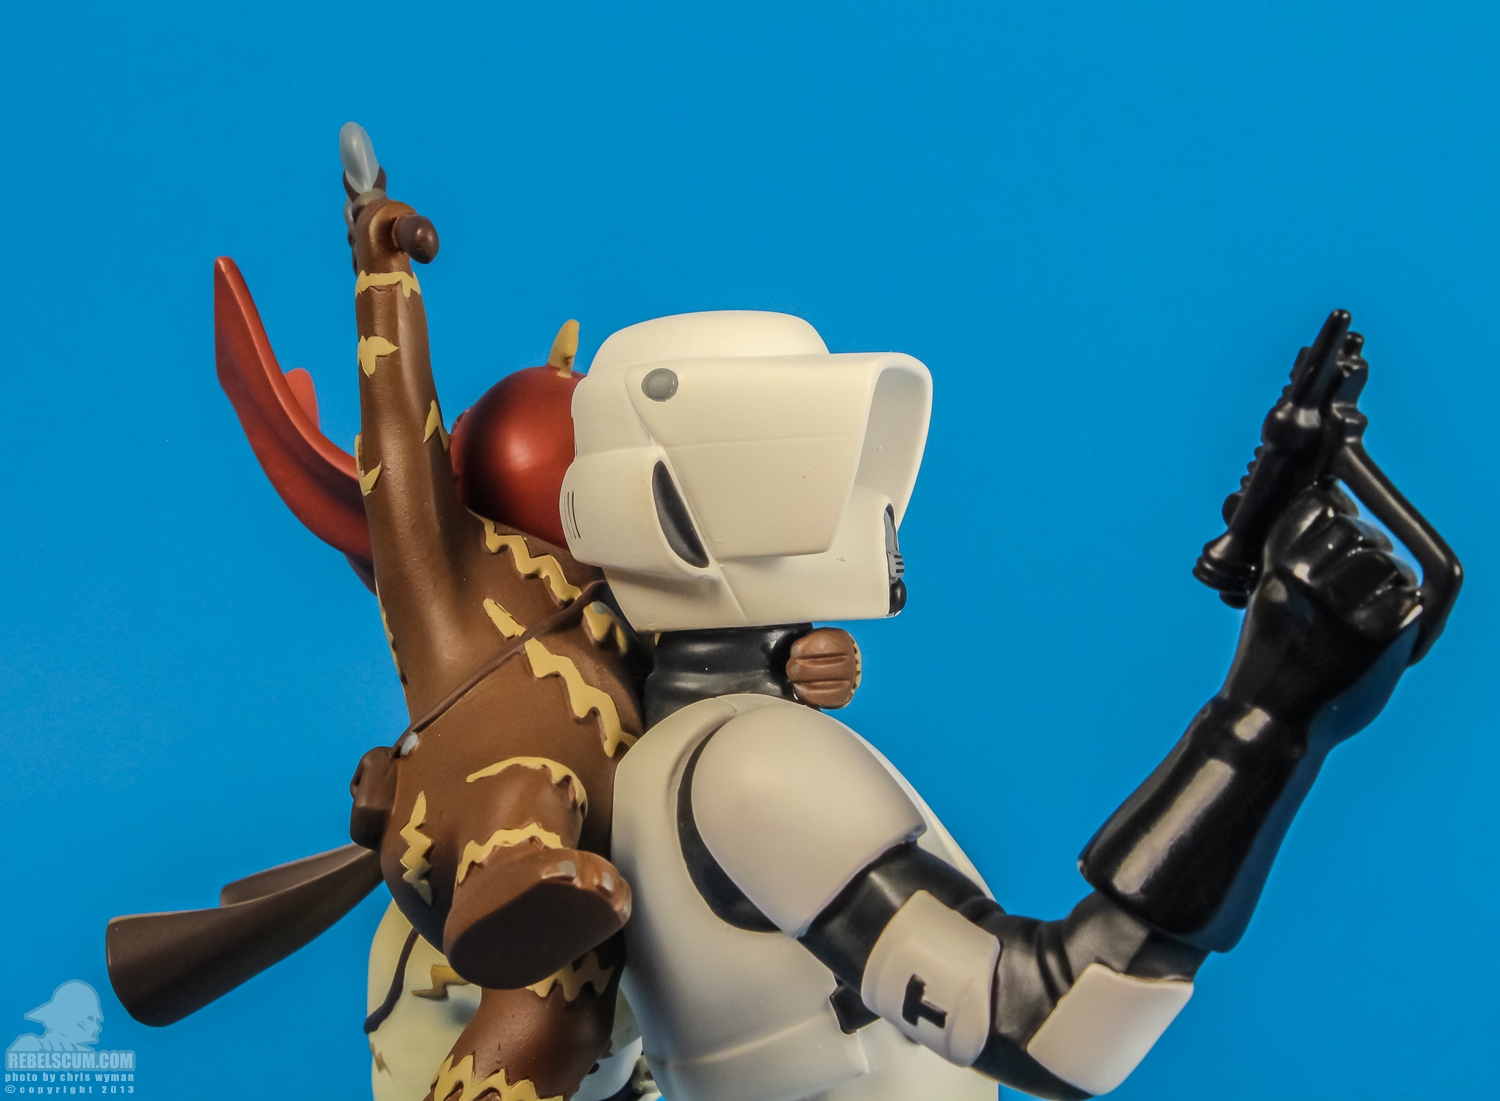 Scout_Trooper_Ewok Attack_Animated_Maquette_Gentle_Giant_Ltd-06.jpg